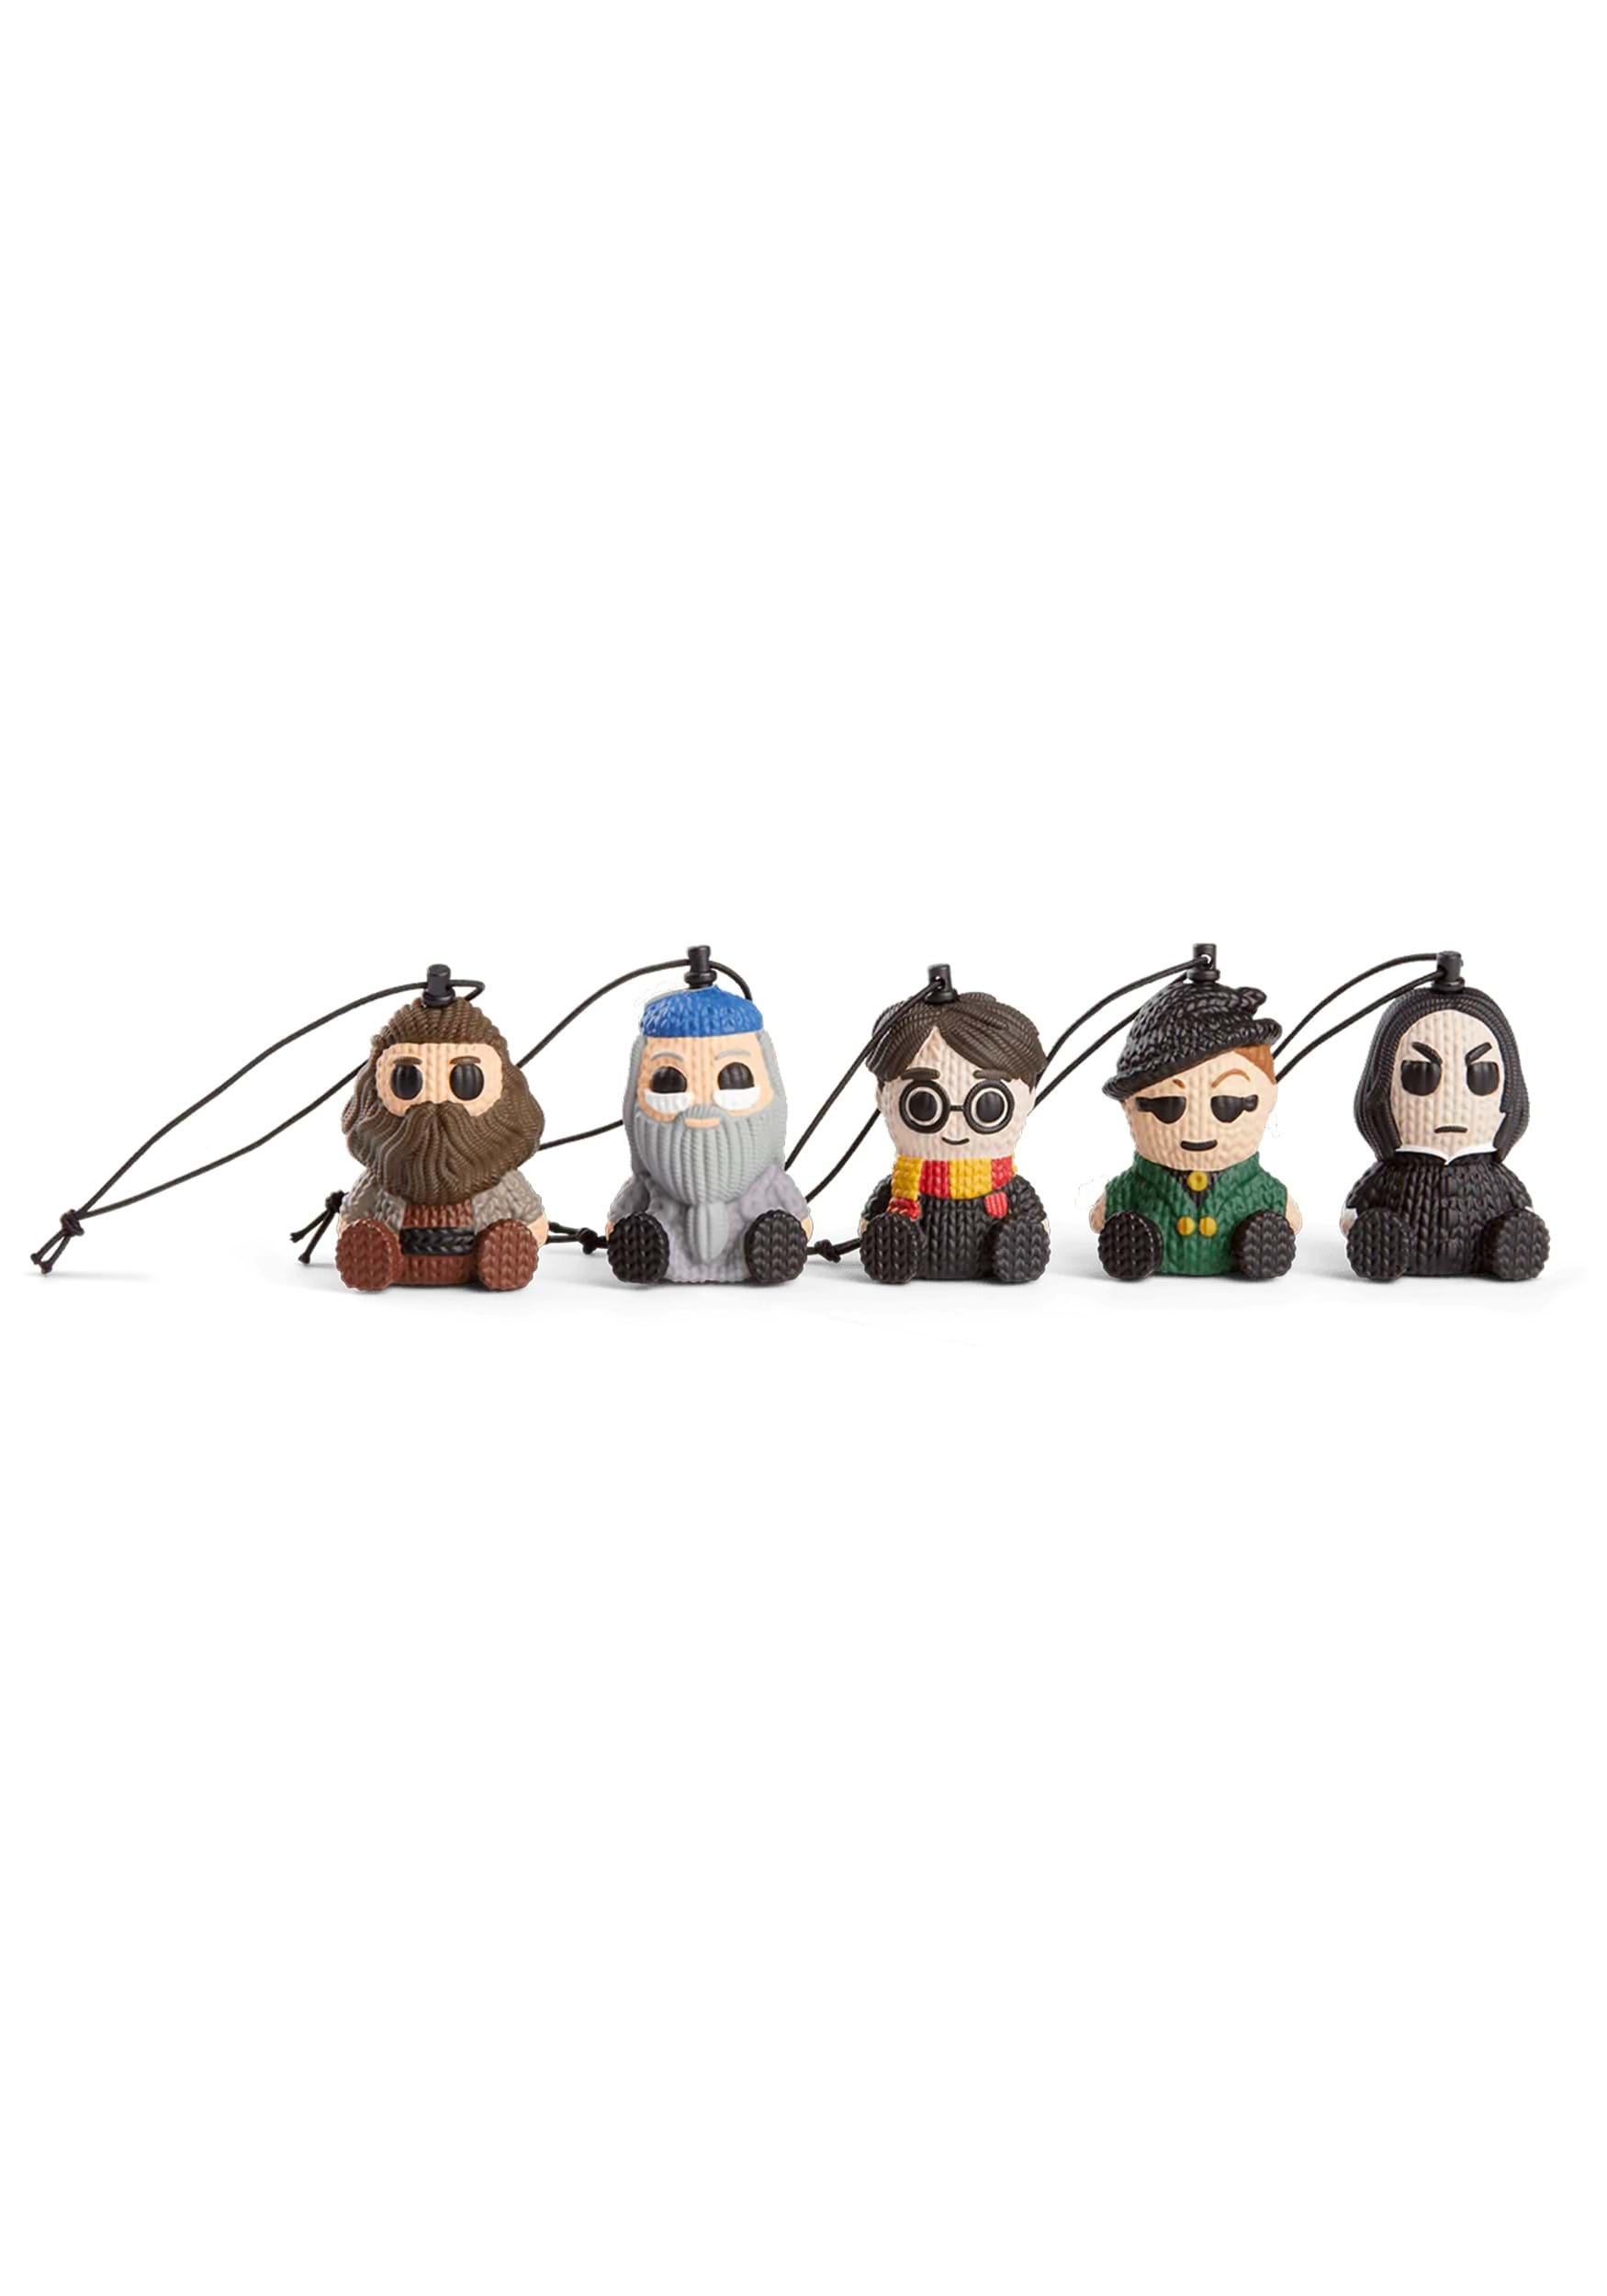 Wizarding World of Harry Potter Handmade by Robots Micro 5 Pack Charm Set